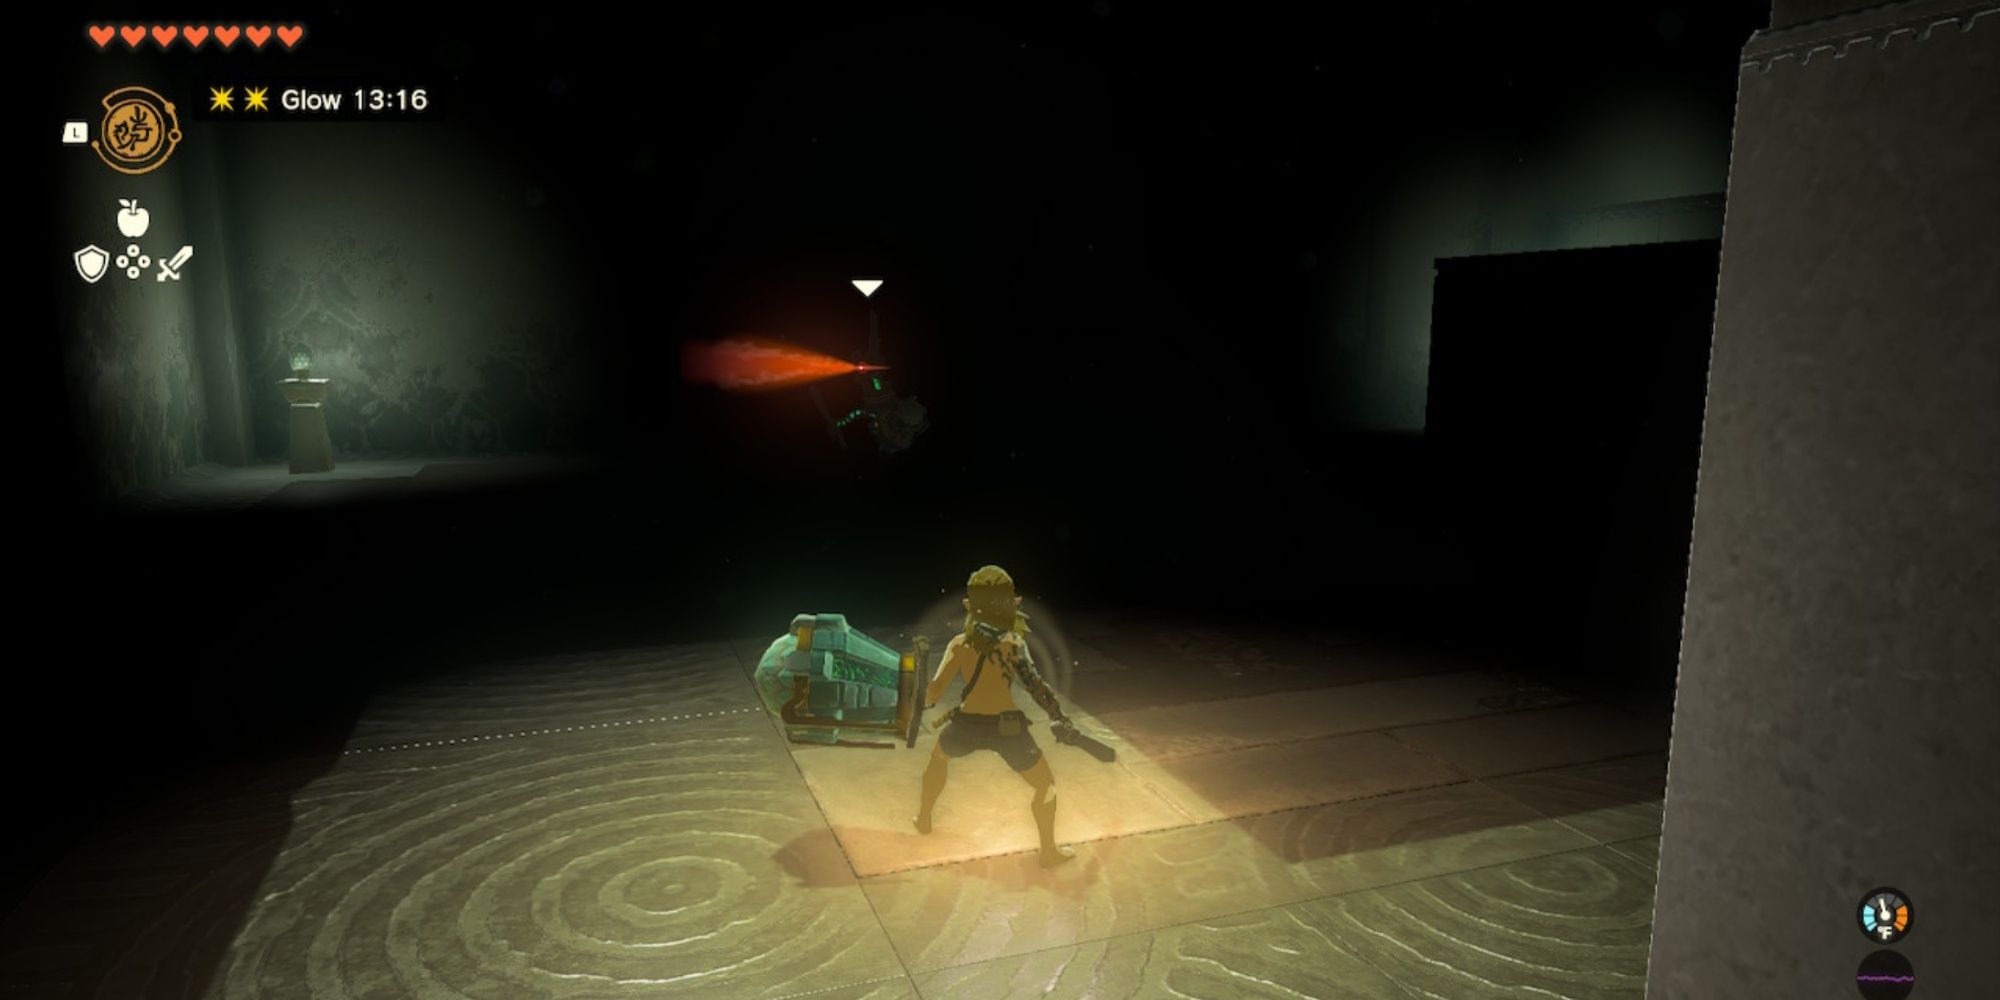 Link approaching a Construct with a Light Shield and a Club in the Simosiwak Shrine in The Legend of Zelda: Tears of the Kingdom